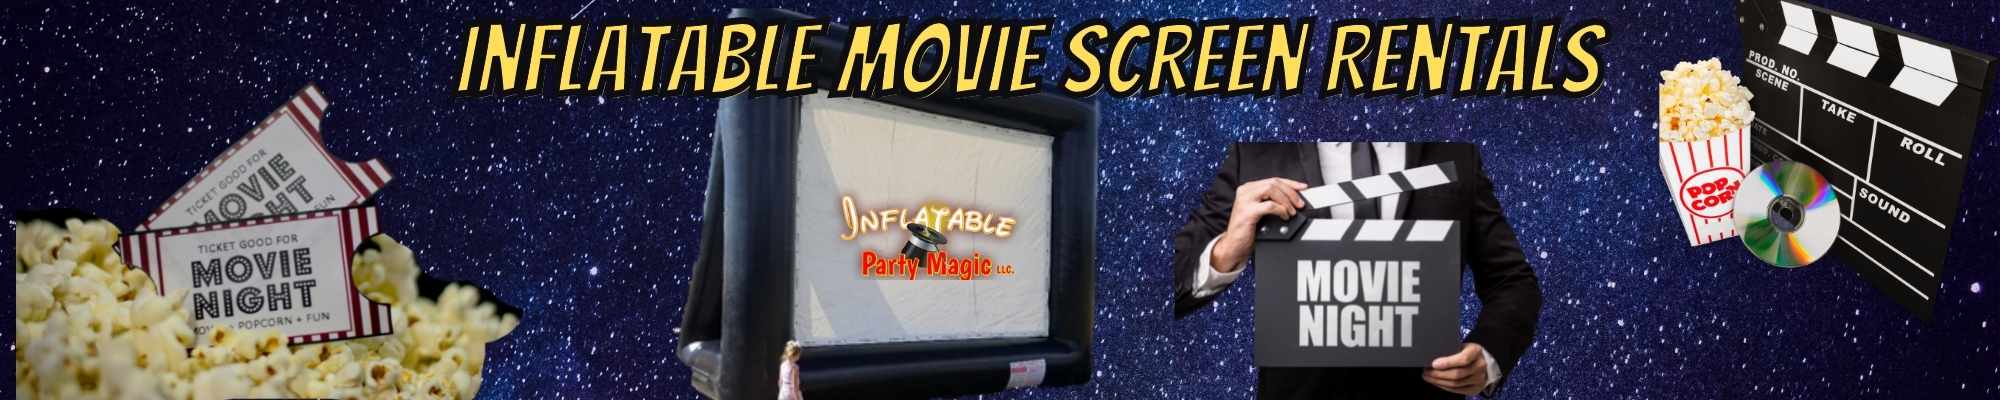 Inflatable Movie Screen Rentals near me DFW Tx